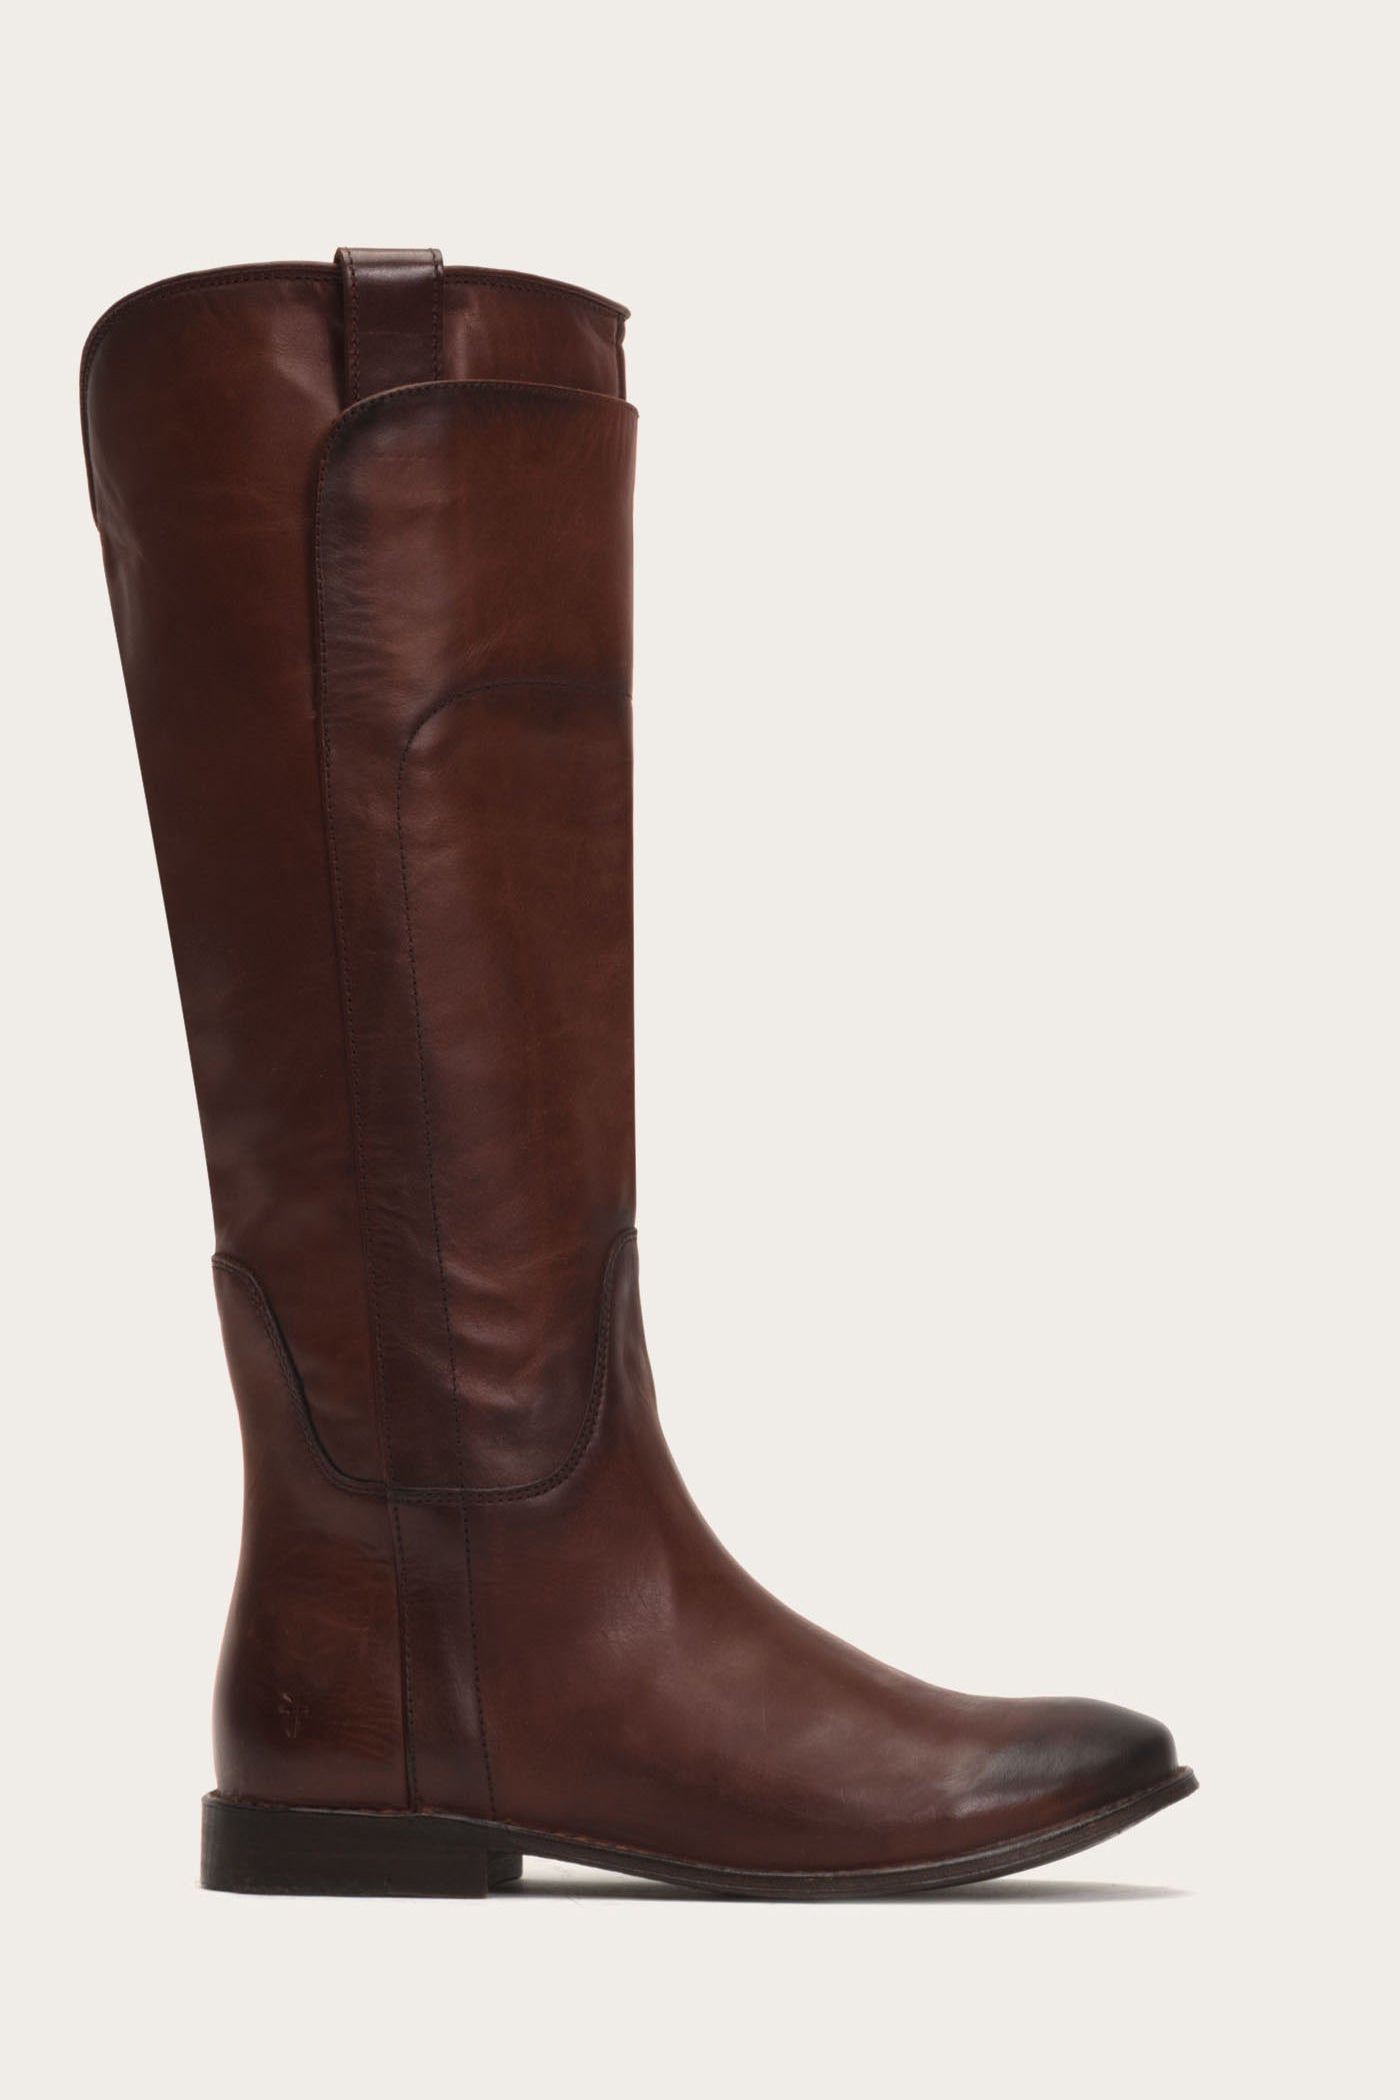 paige tall riding boot frye sale